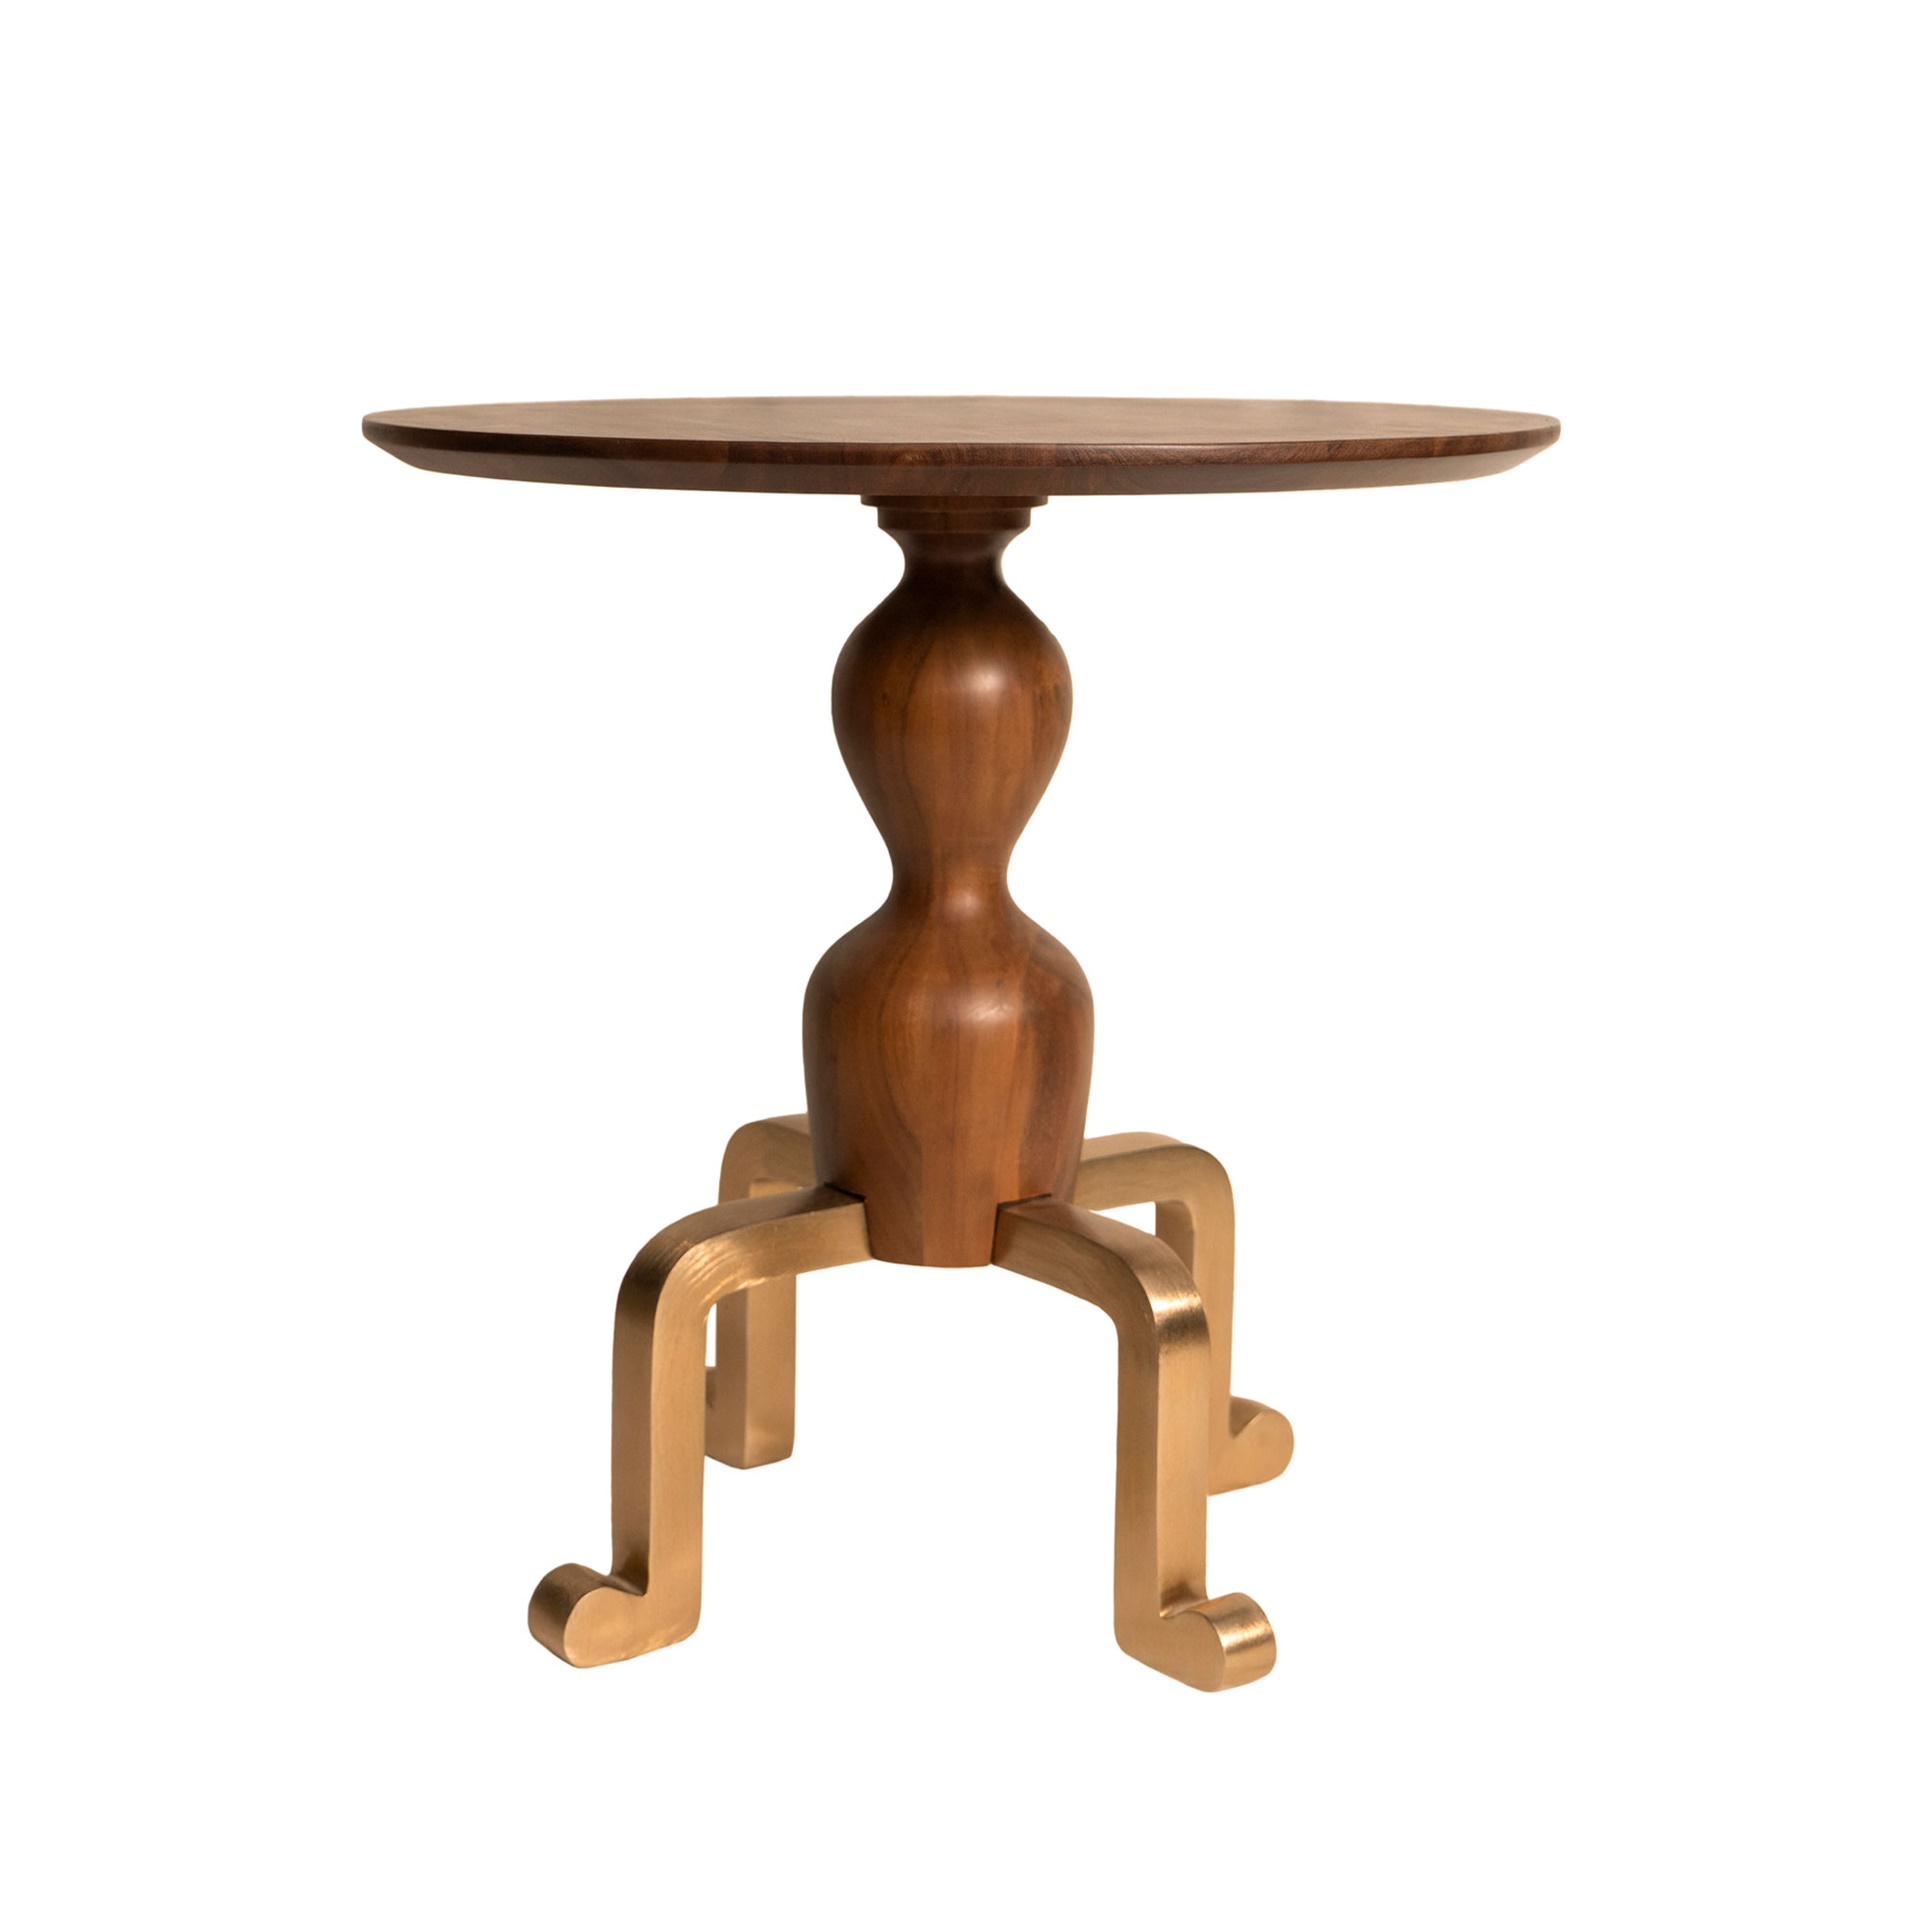 Eclectic side accent table Juno Wood Side Table showcases unique anthropomorphic base design - sold by inmod - amazing anthromorphic furniture designs | padstyle.com